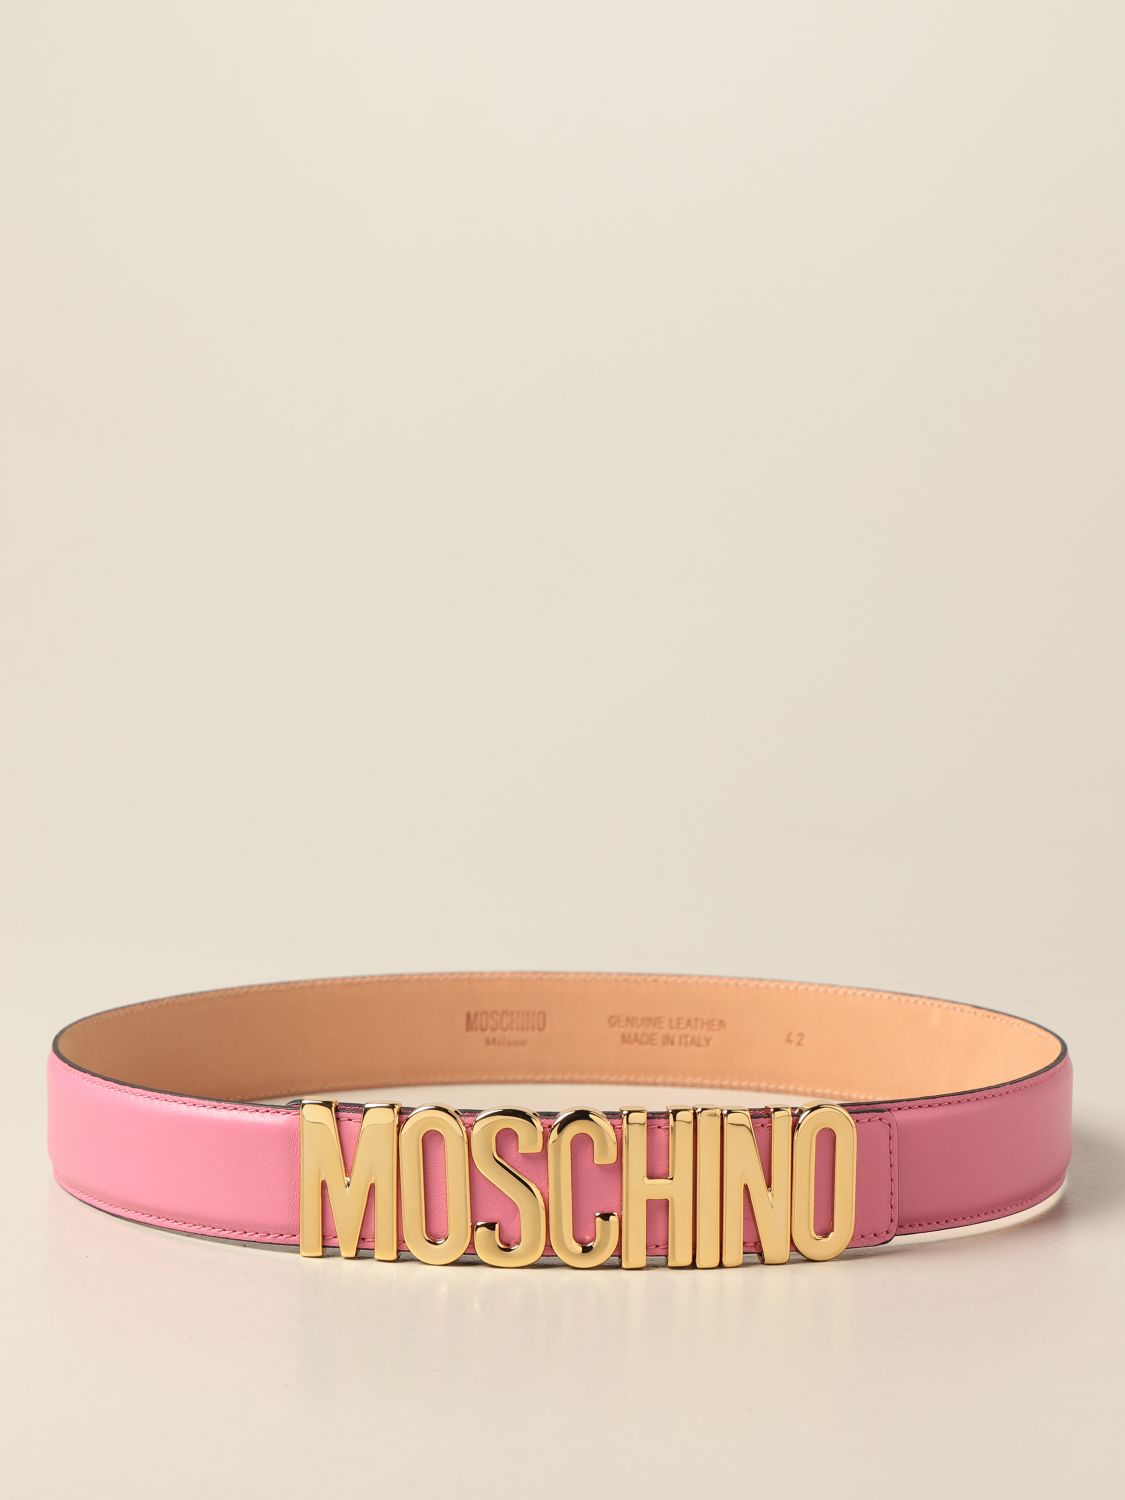 Ladies Women Fashion Letters MOSCHINO Belt Alloy Smooth Belt Buckle Waistband